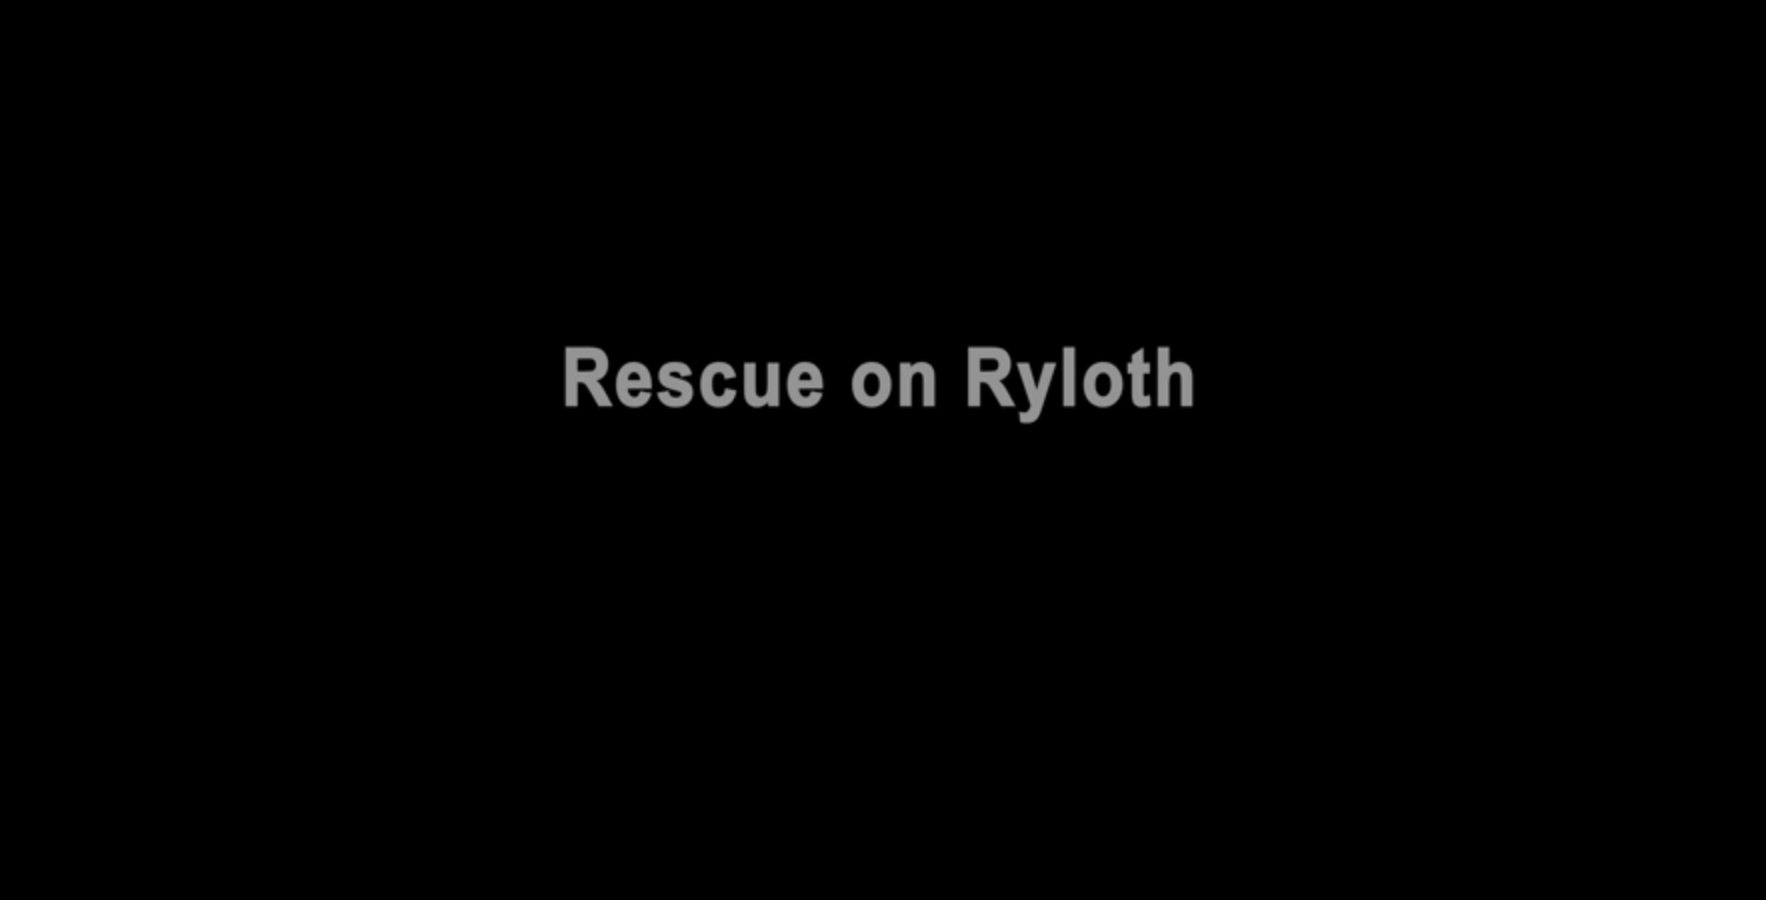 Rescue on Ryloth title card